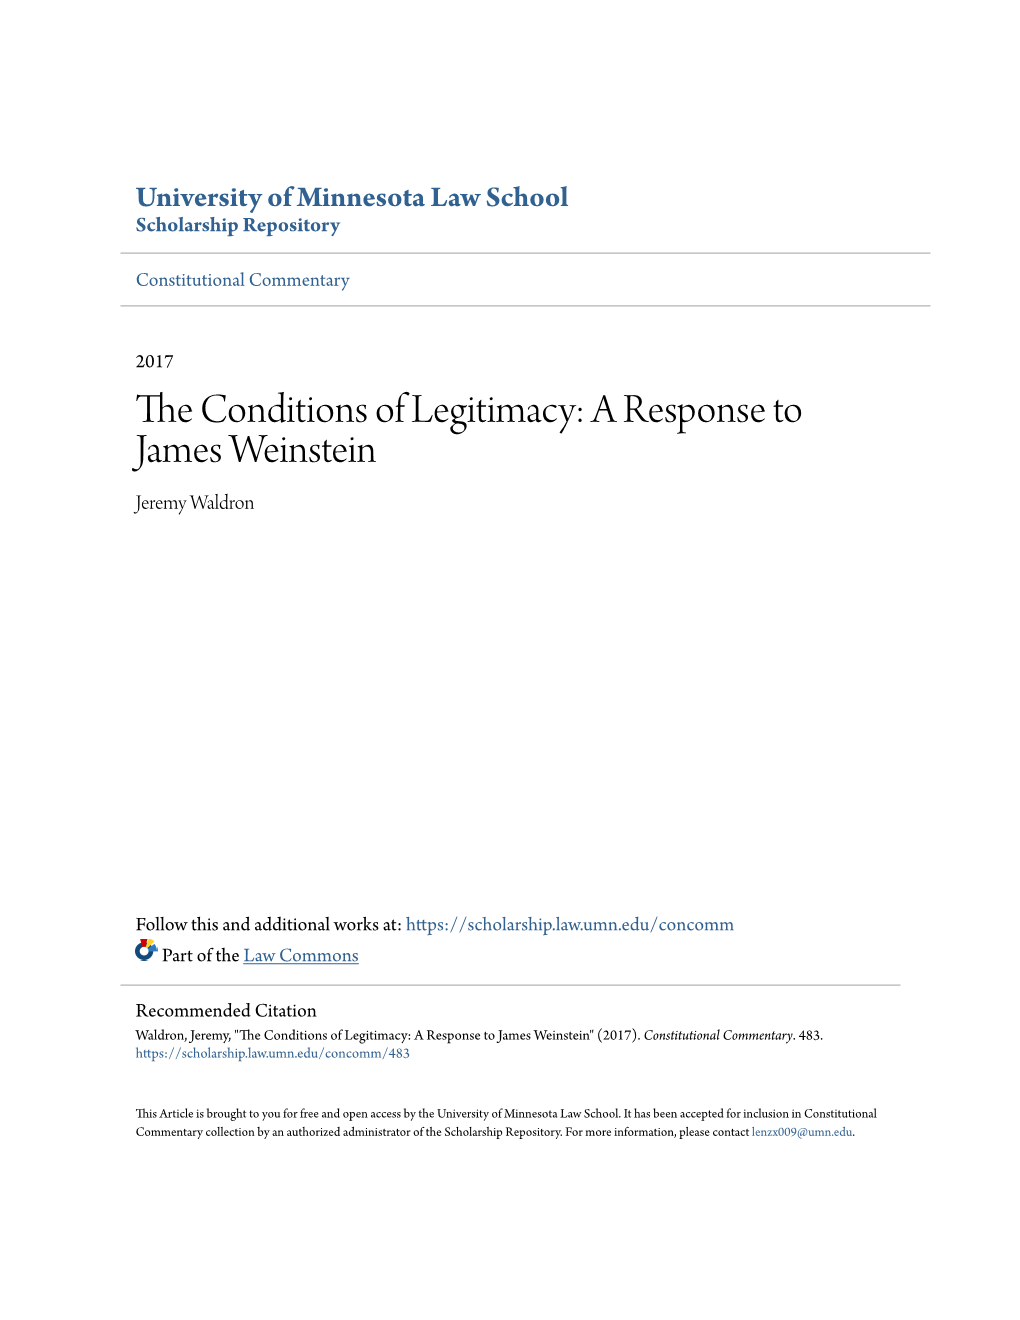 The Conditions of Legitimacy: a Response to James Weinstein